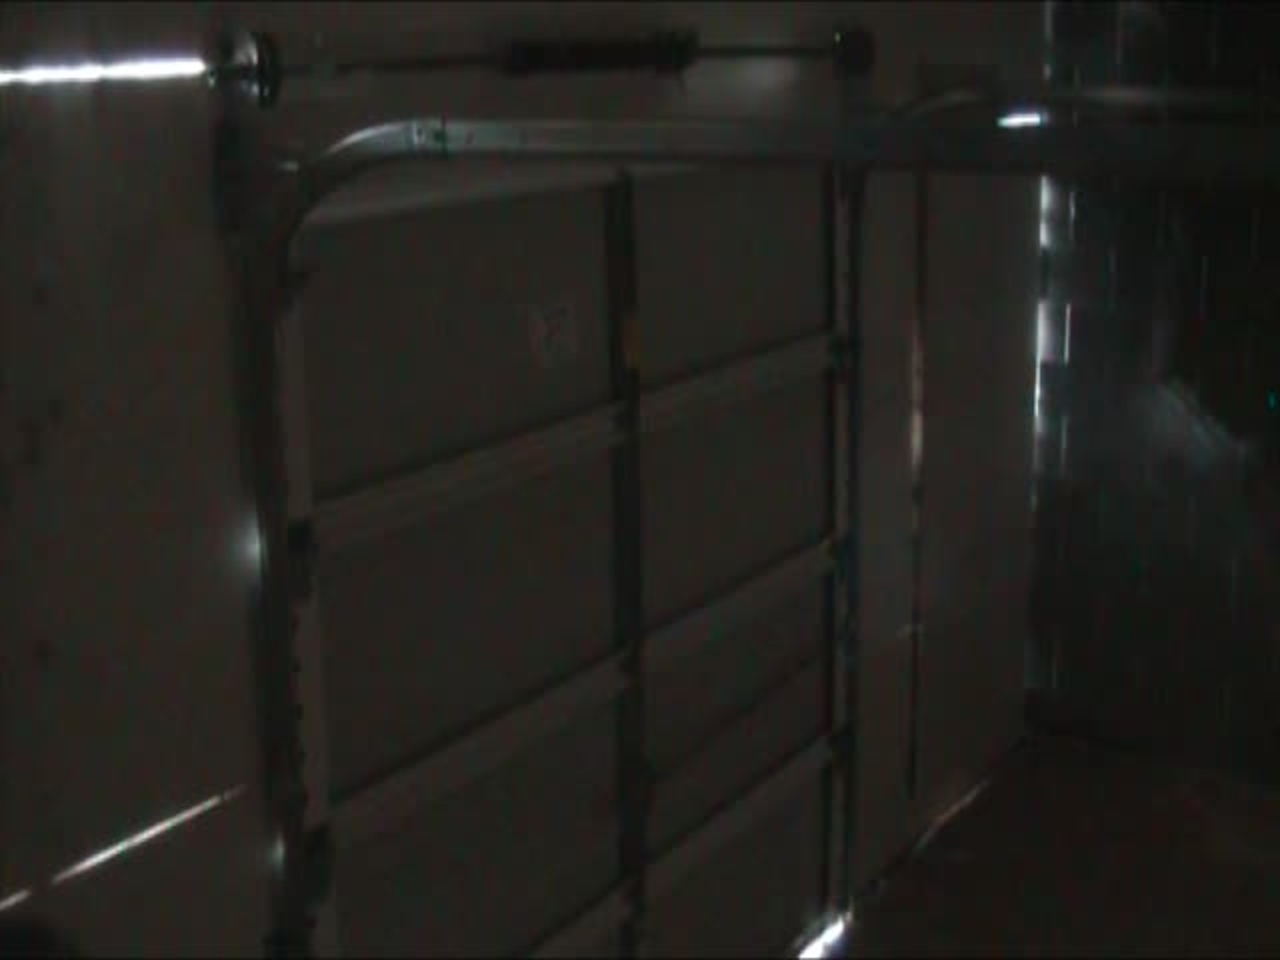 Test 12: Dispersion and Burning Behavior of Hydrogen Released in a Full-Scale Residential Garage in the Presence and Absence of Conventional Automobiles (View near garage door interior)